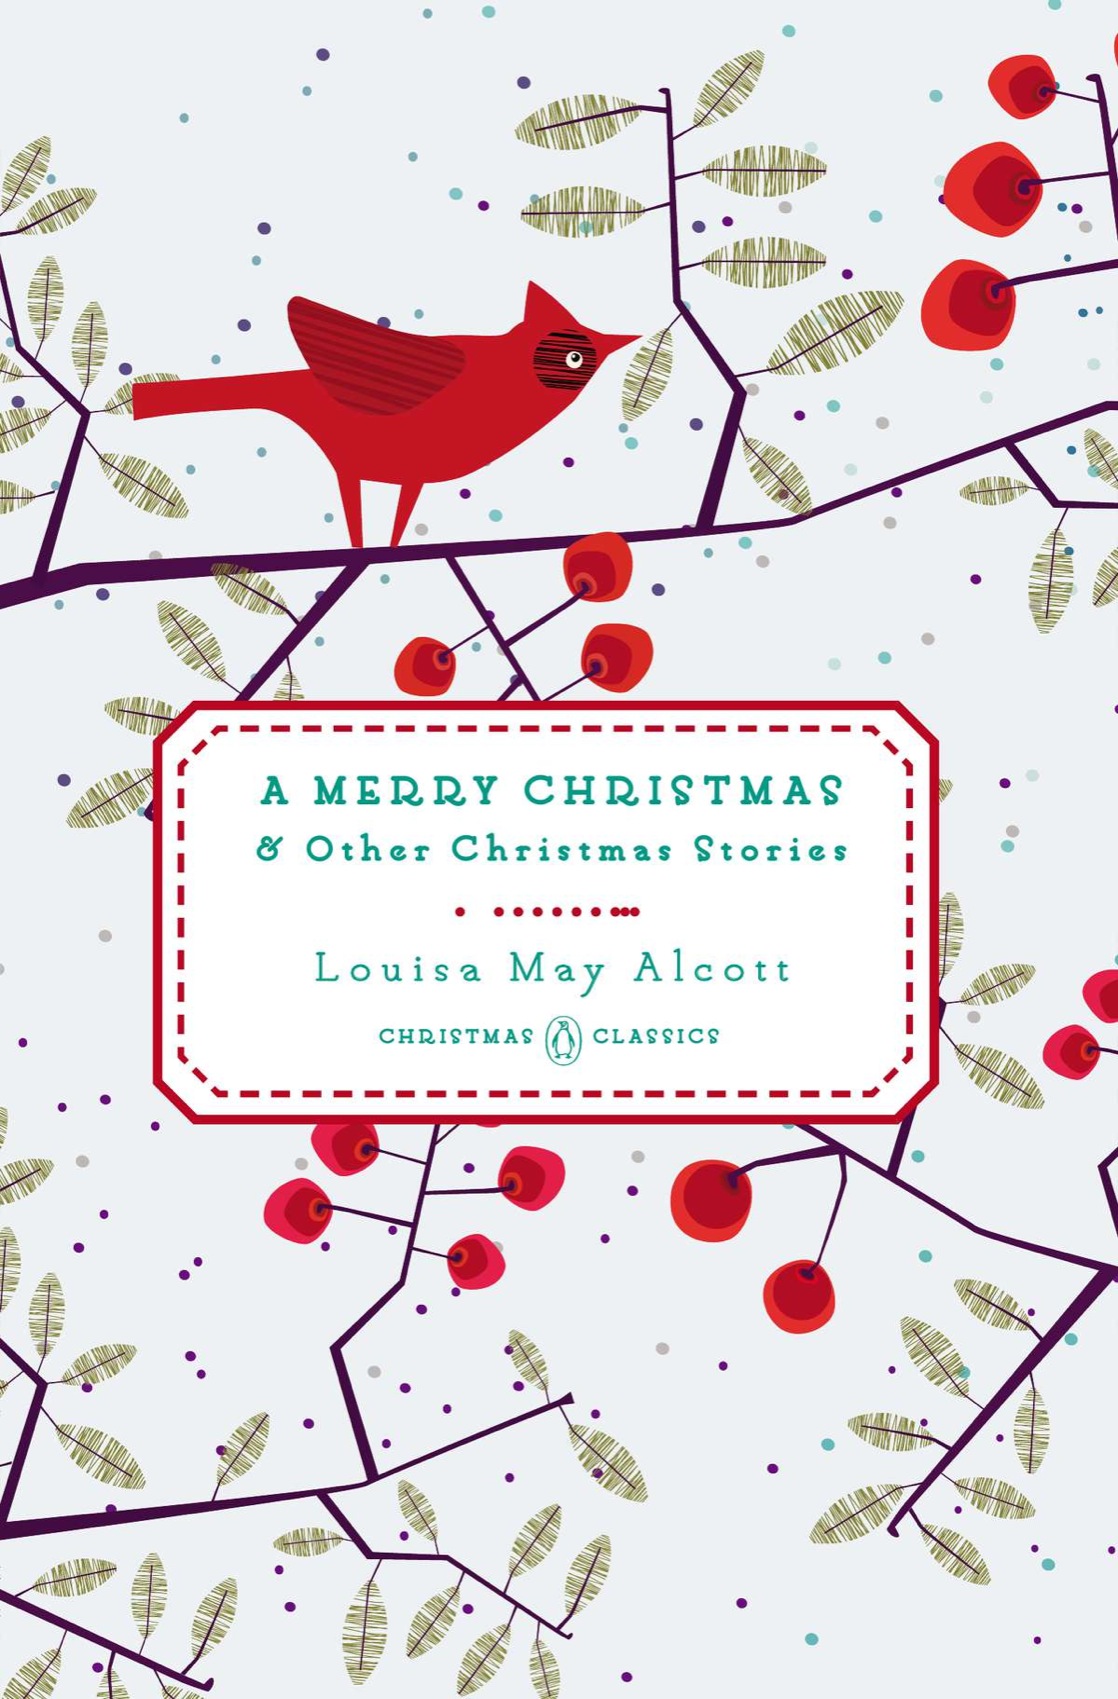 A Merry Christmas (2014) by Louisa May Alcott